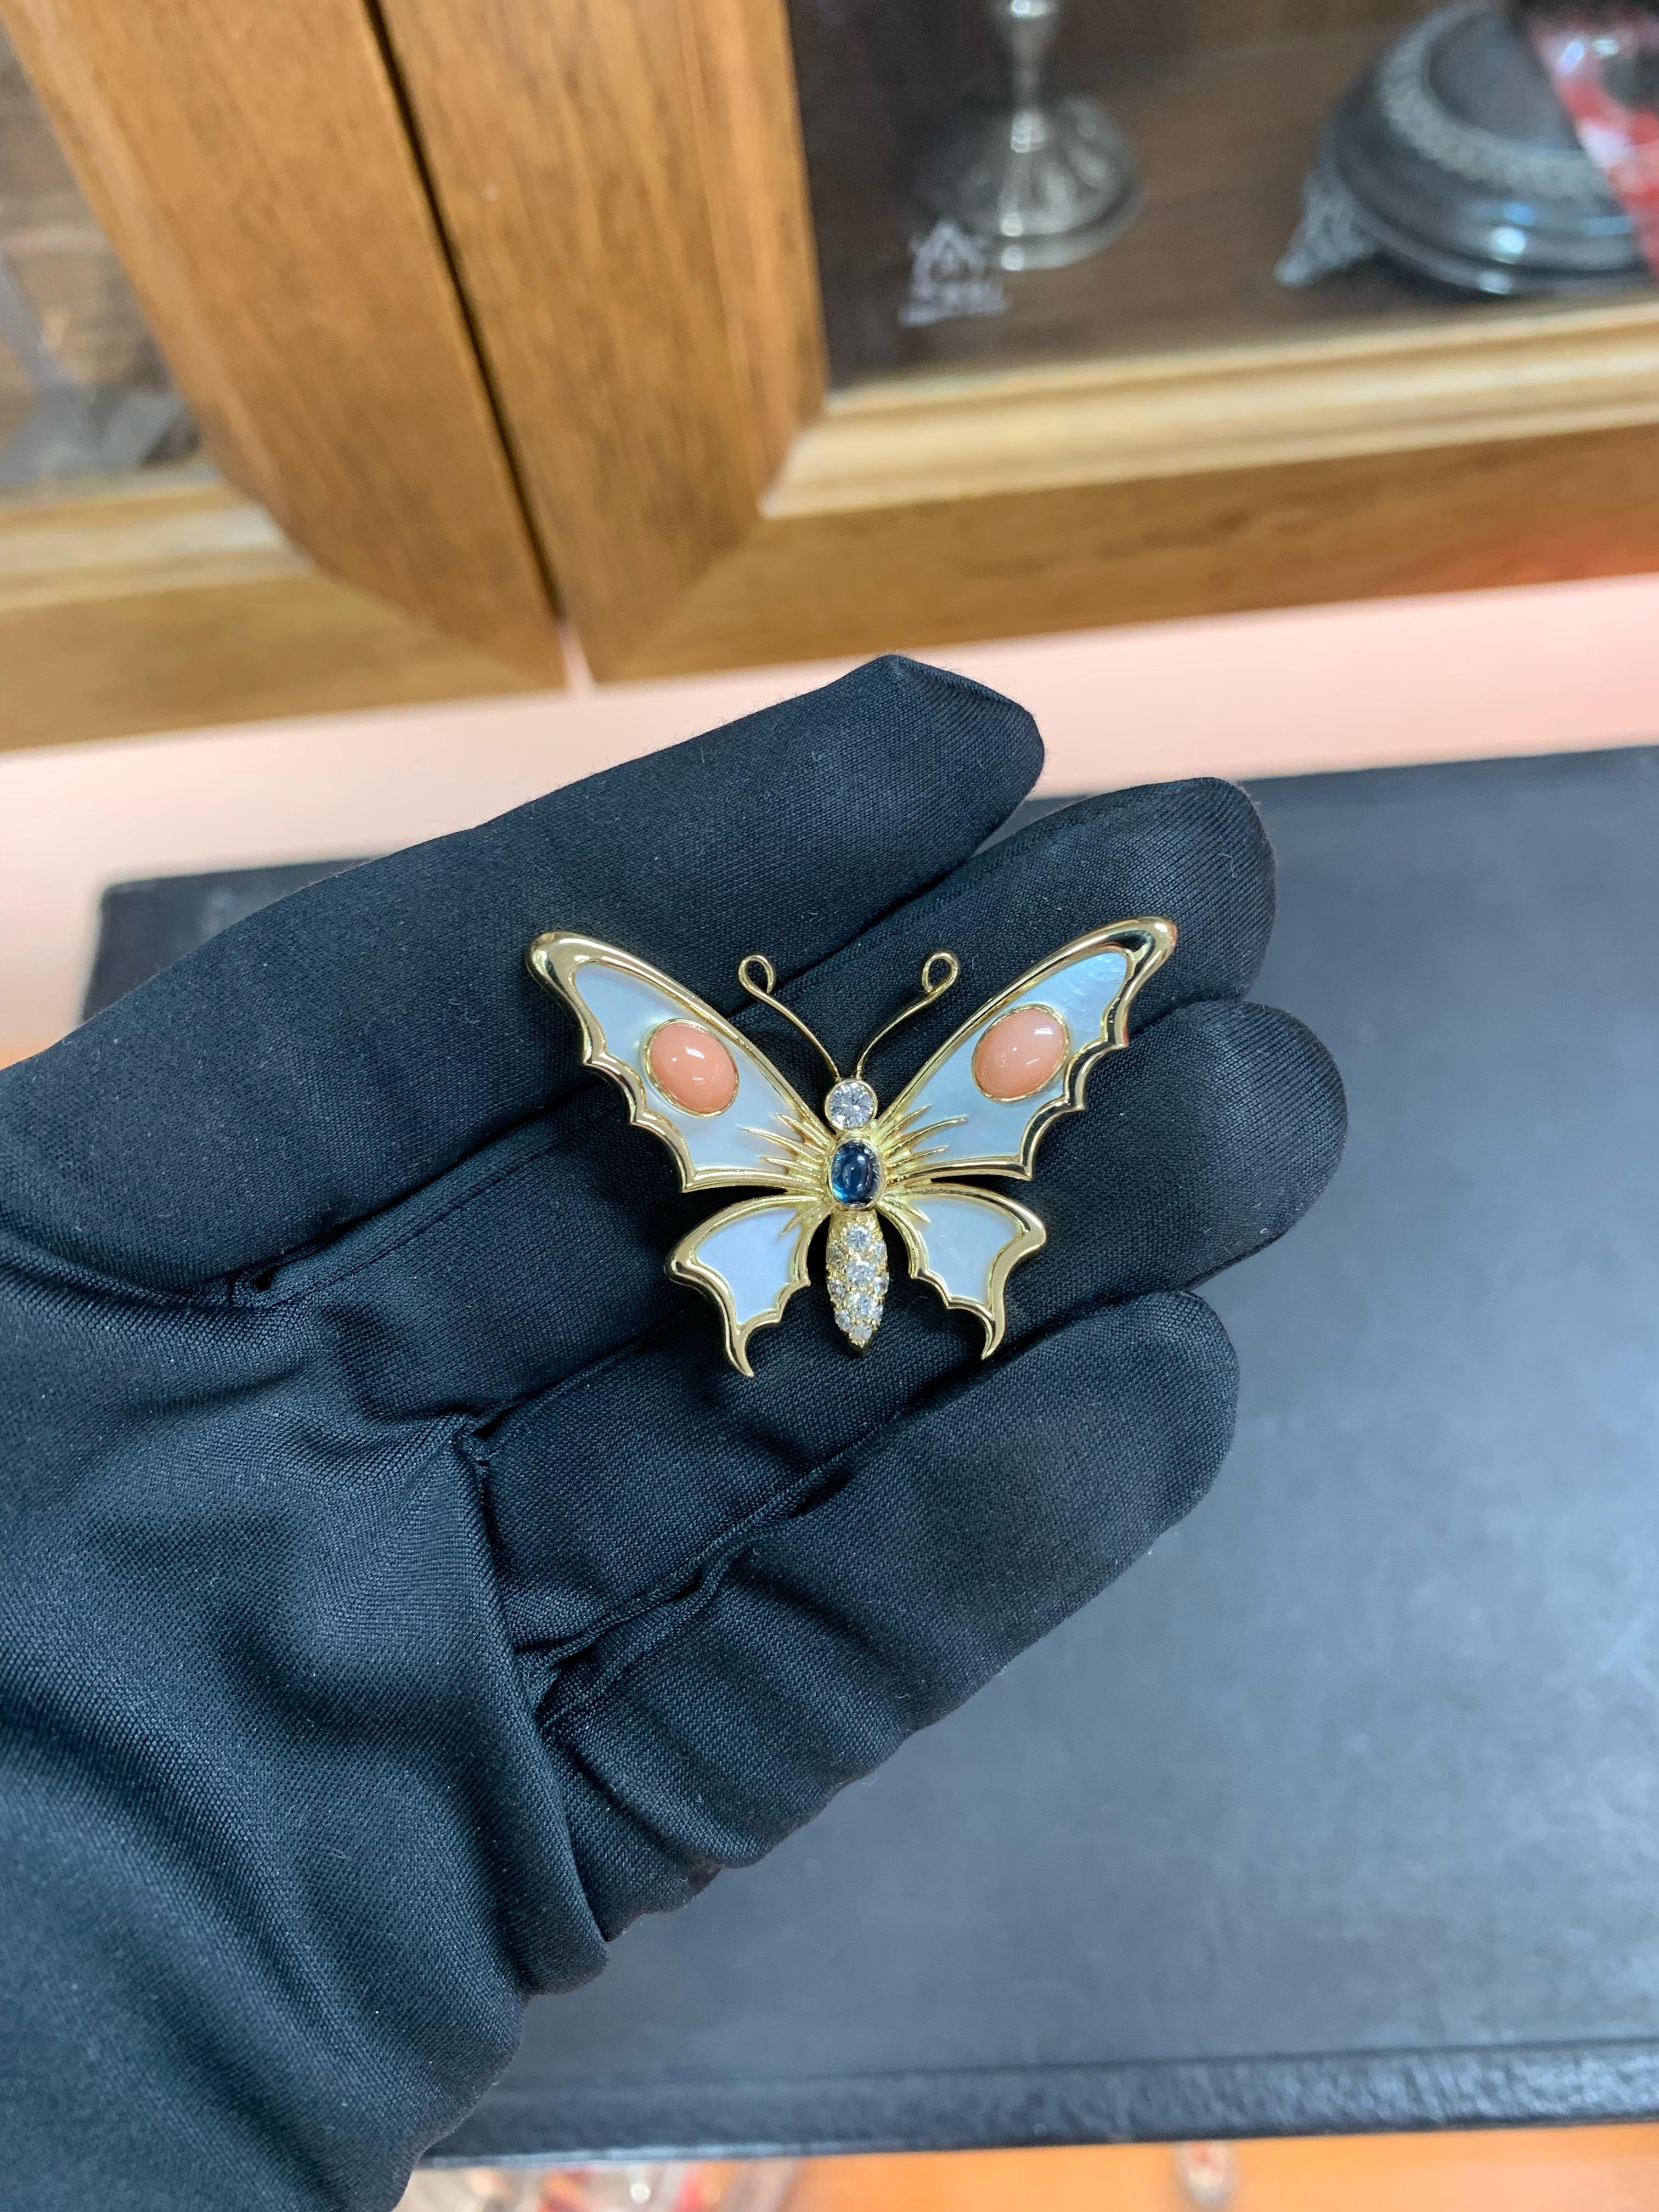 Beautifully Hand Crafted 18k Yellow Gold Butterfly Pendant Set With Mother Of Pearl, Corals, Blue Sapphire & Diamonds.
Amazing Shine, Incredible Craftsmanship.
Great Statement Piece.
Nice & Large Size Pendant.
